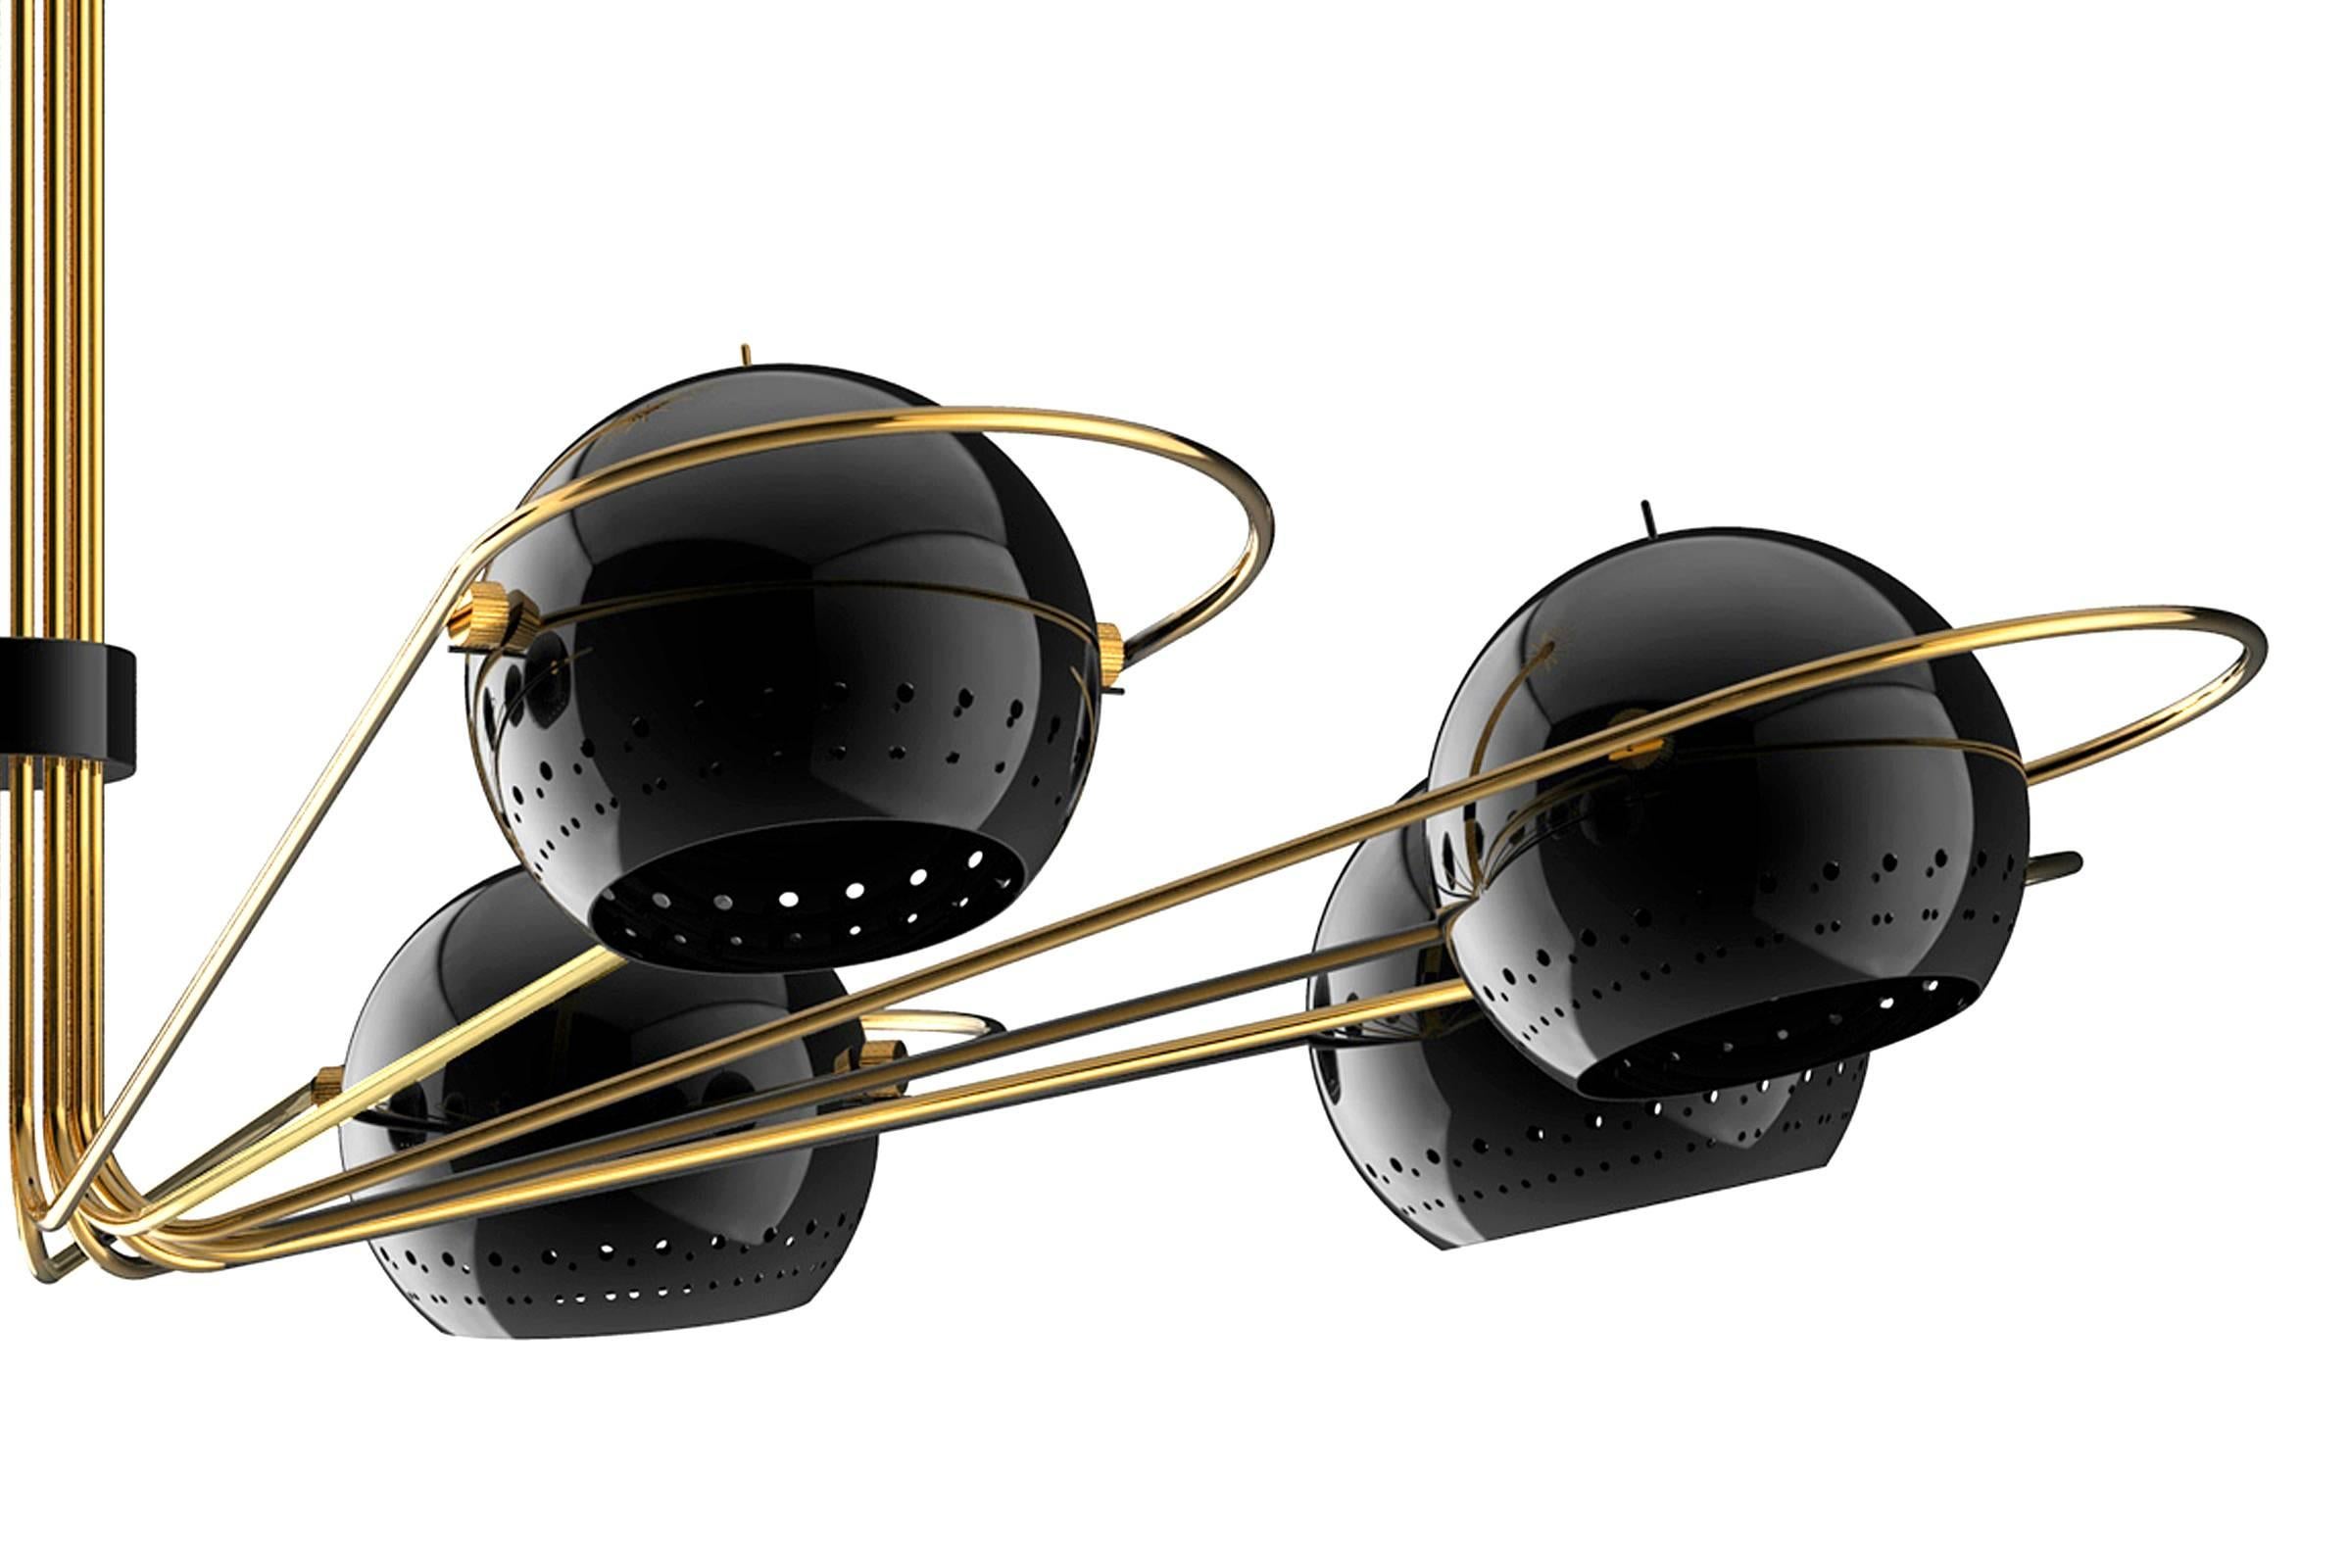 Chandelier black ball lights with polished brass round arcs
and steel spherical diffusers style of 1960s. Eight arms with adjustable
lights. Available in all black lights chandelier.

 